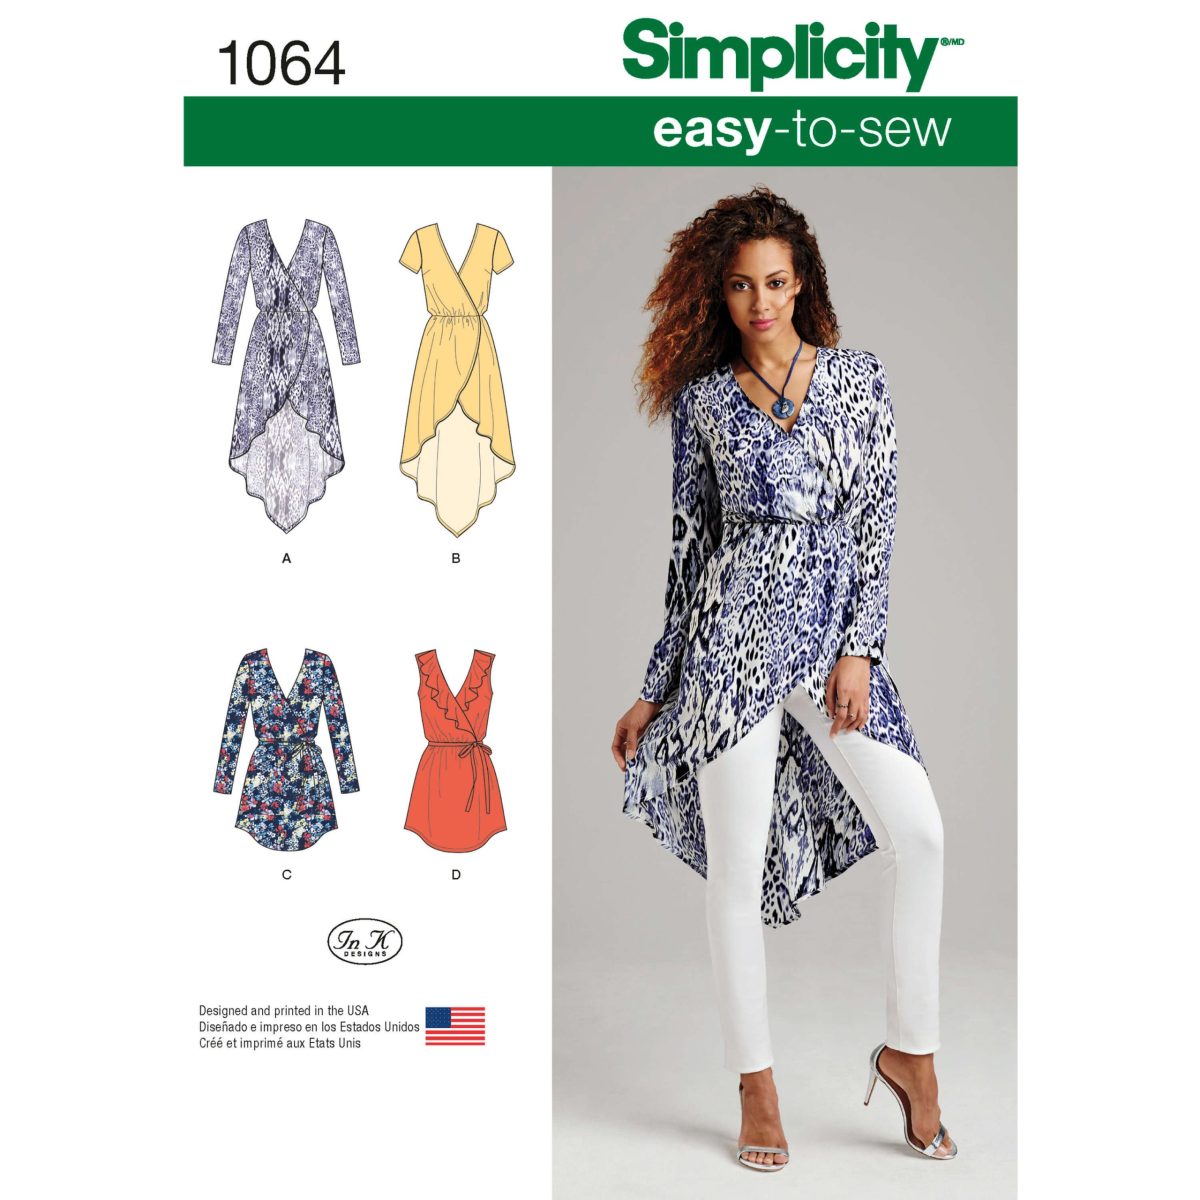 Simplicity Sewing Pattern 1064 Misses' Tunics